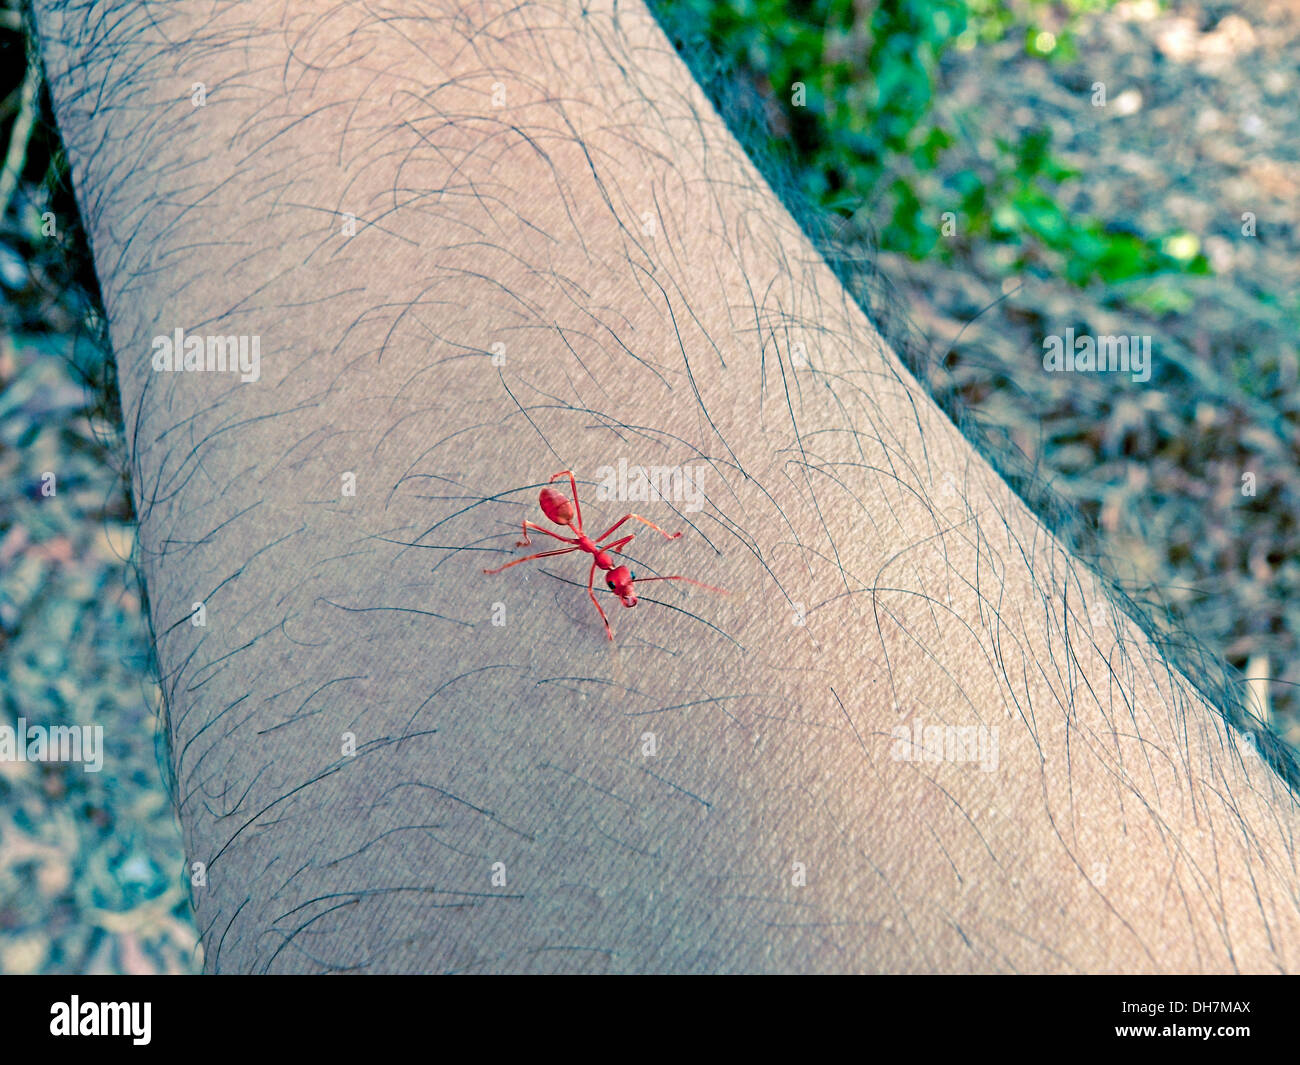 Fire Ant on human hand Stock Photo